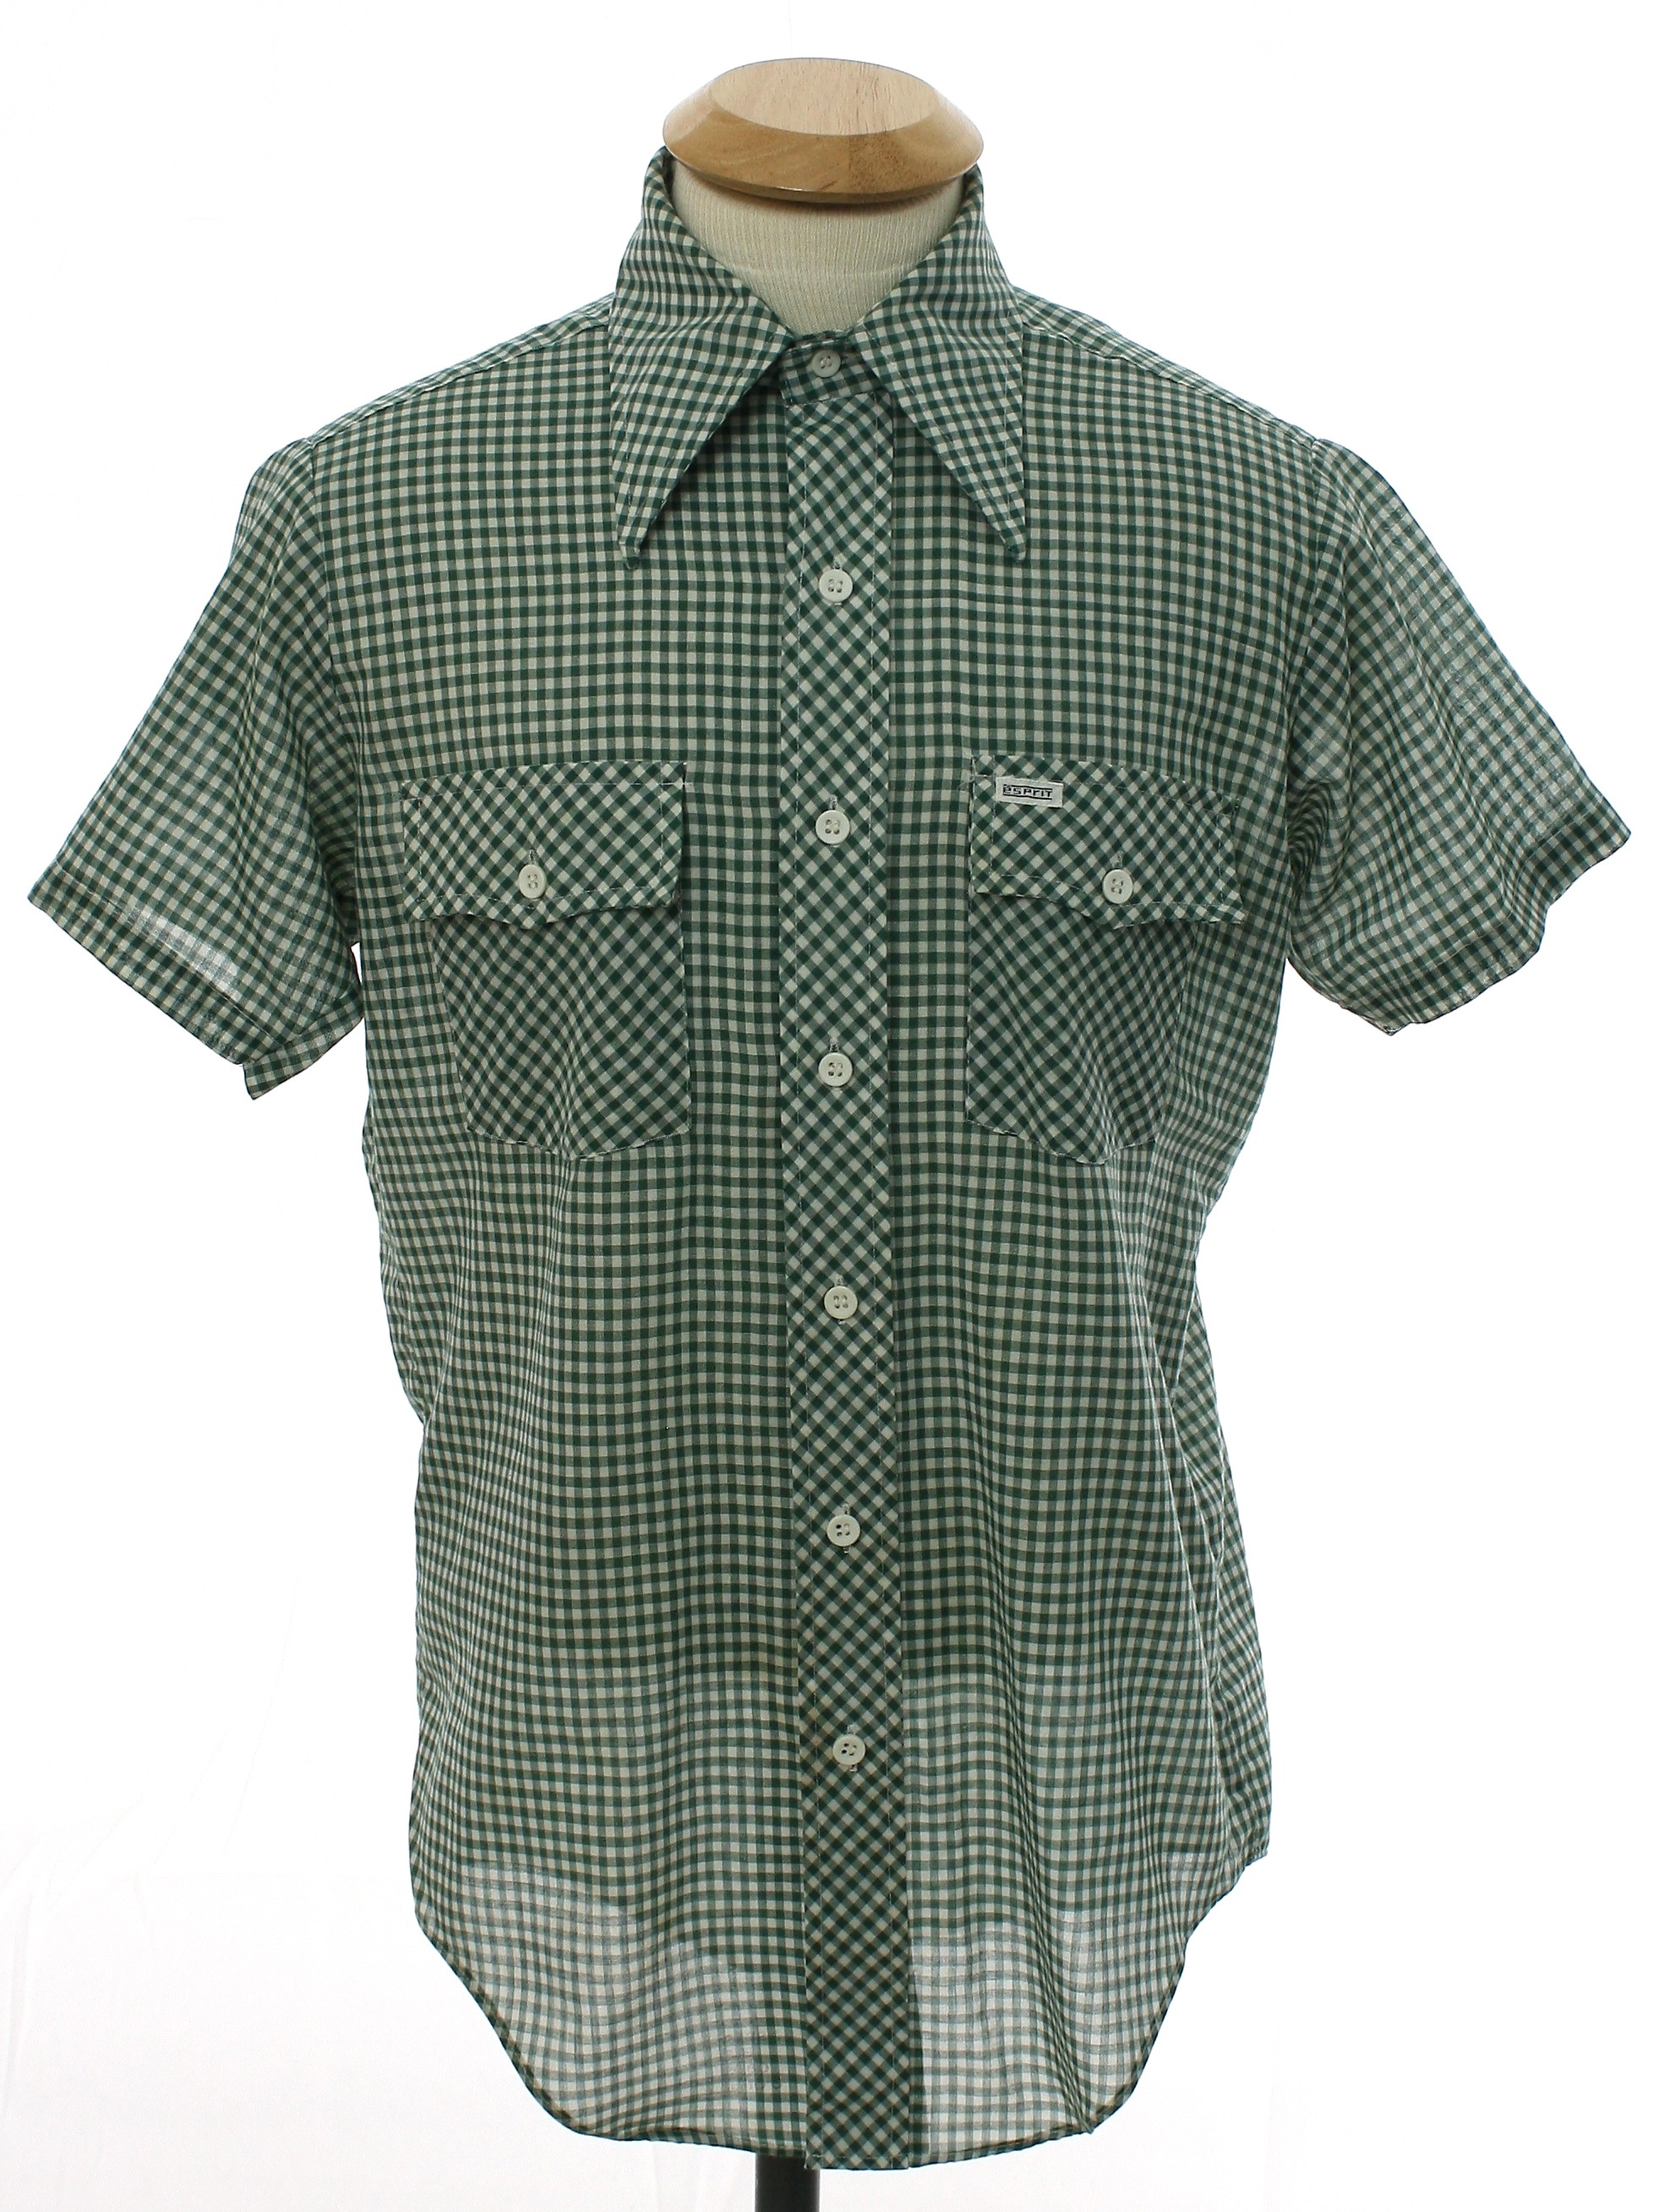 Esprit 1970s Vintage Shirt: 70s -Esprit- Mens green and ivory small ...